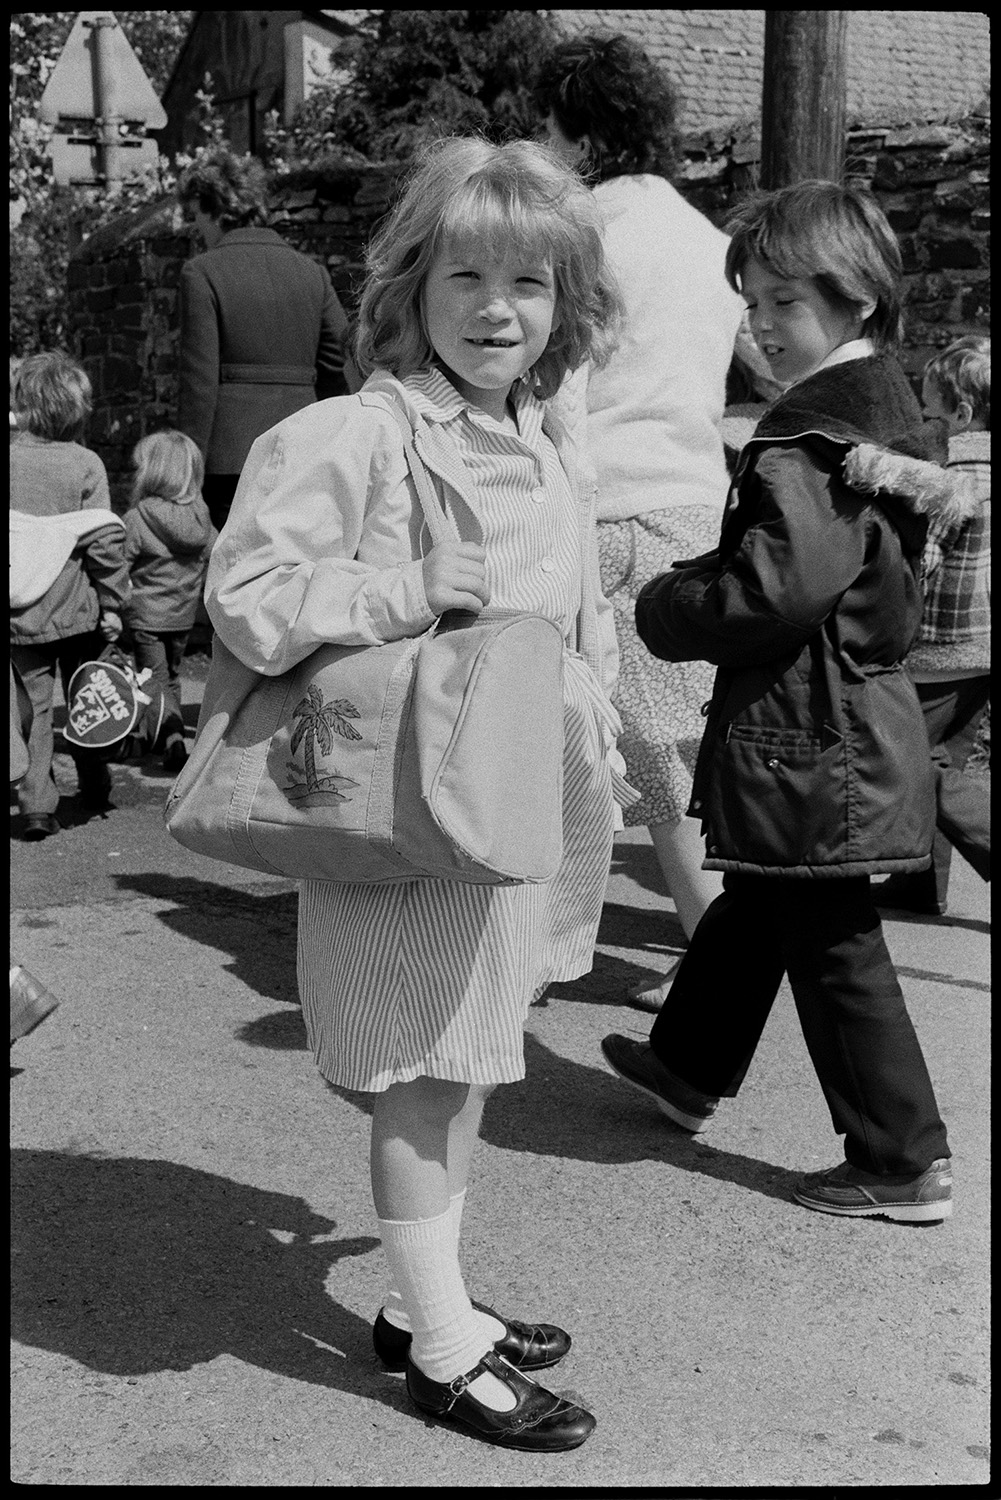 Schoolchildren after school, girls.<br />
[Nicky Squire leaving Dolton Primary School, carrying a holdall bag. Other children and women can be seen behind her.]